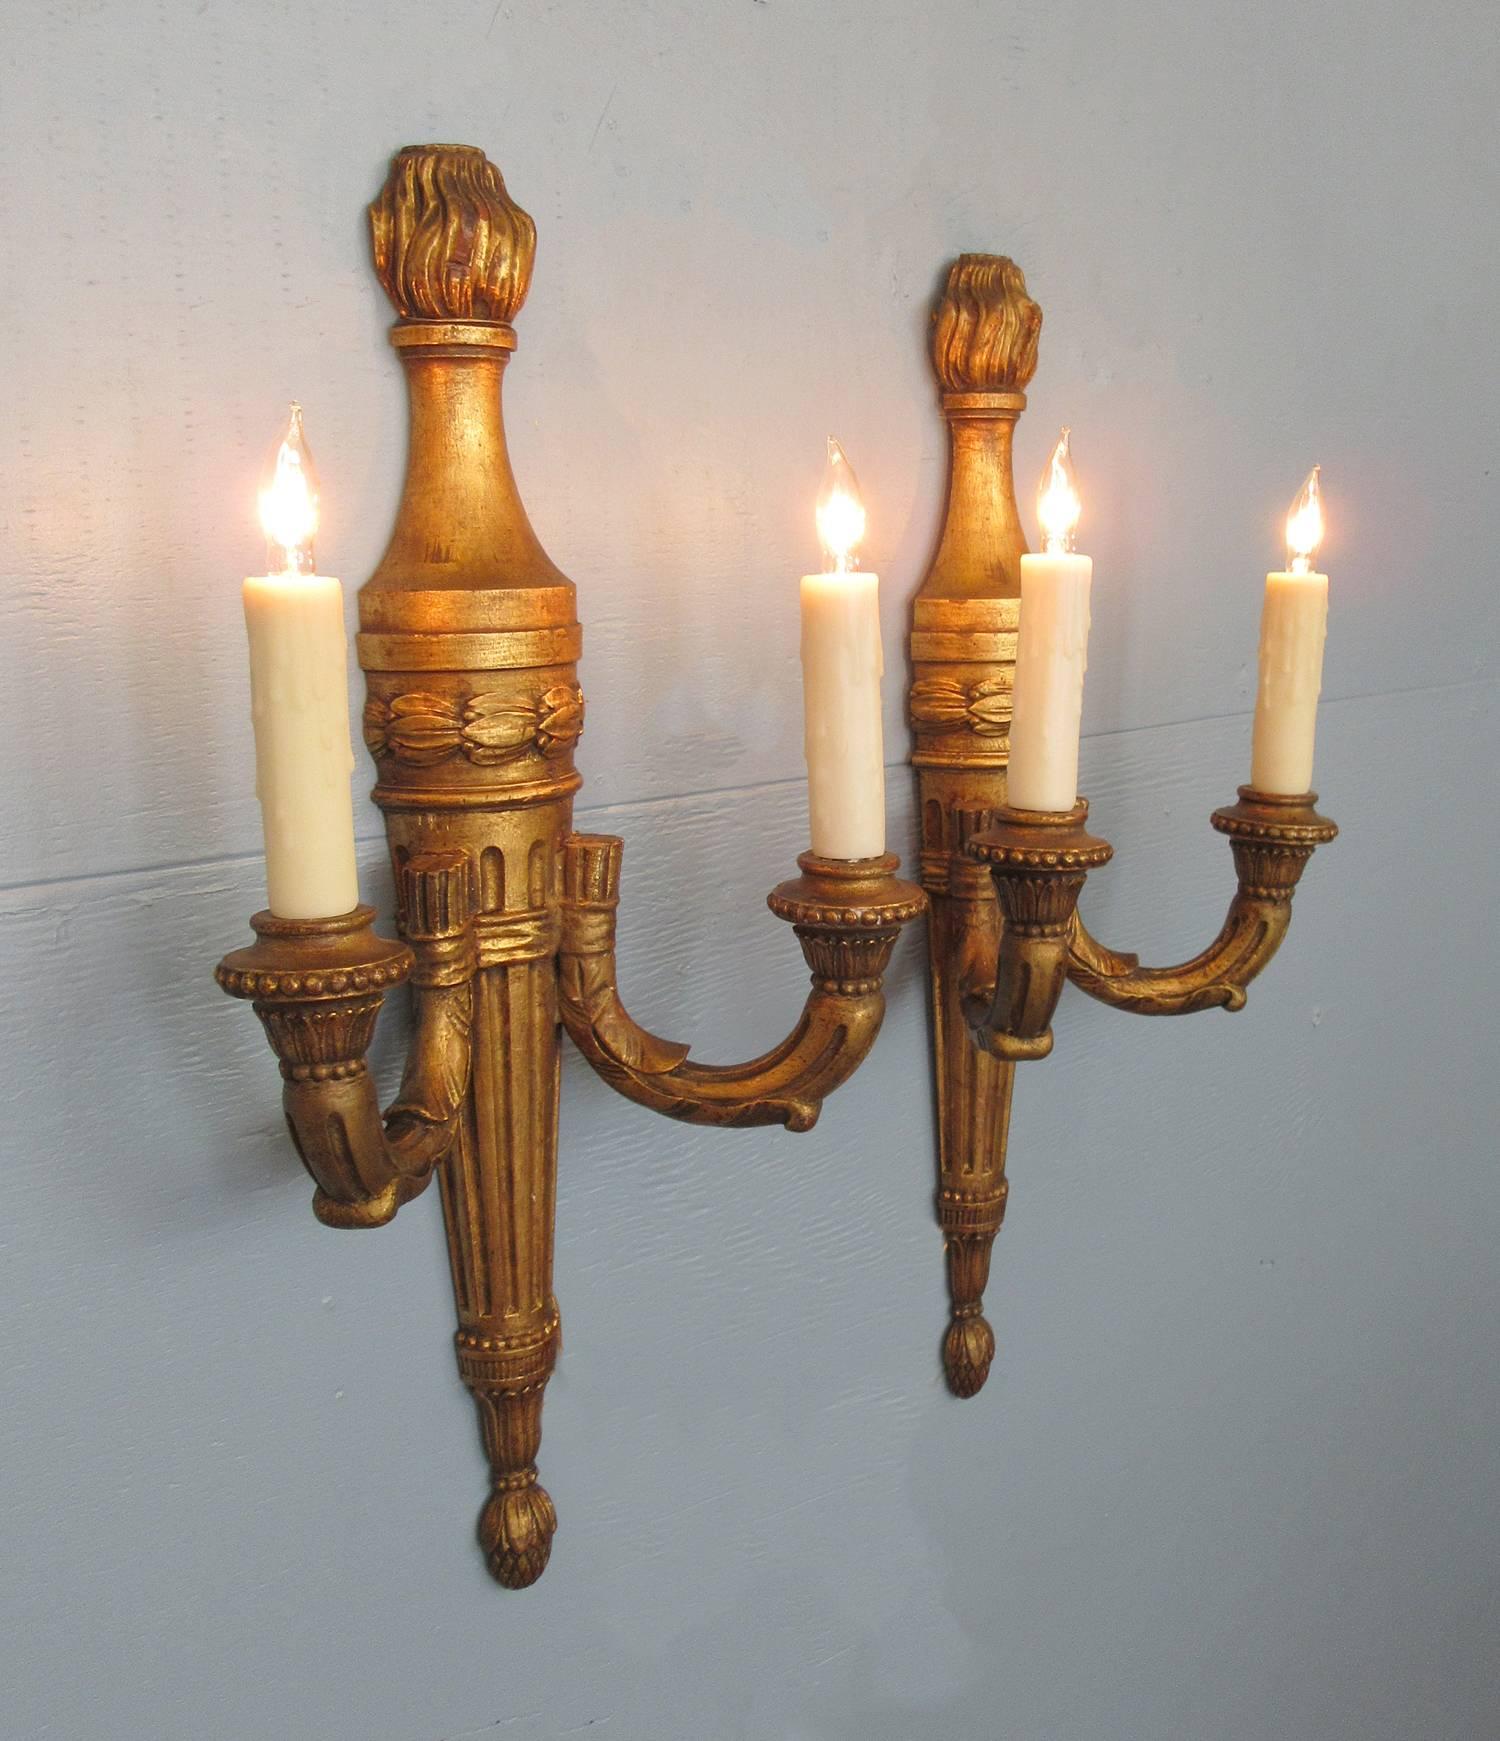 Pair of Early 20th Century Italian Neoclassical Giltwood Torchiere Sconces 4